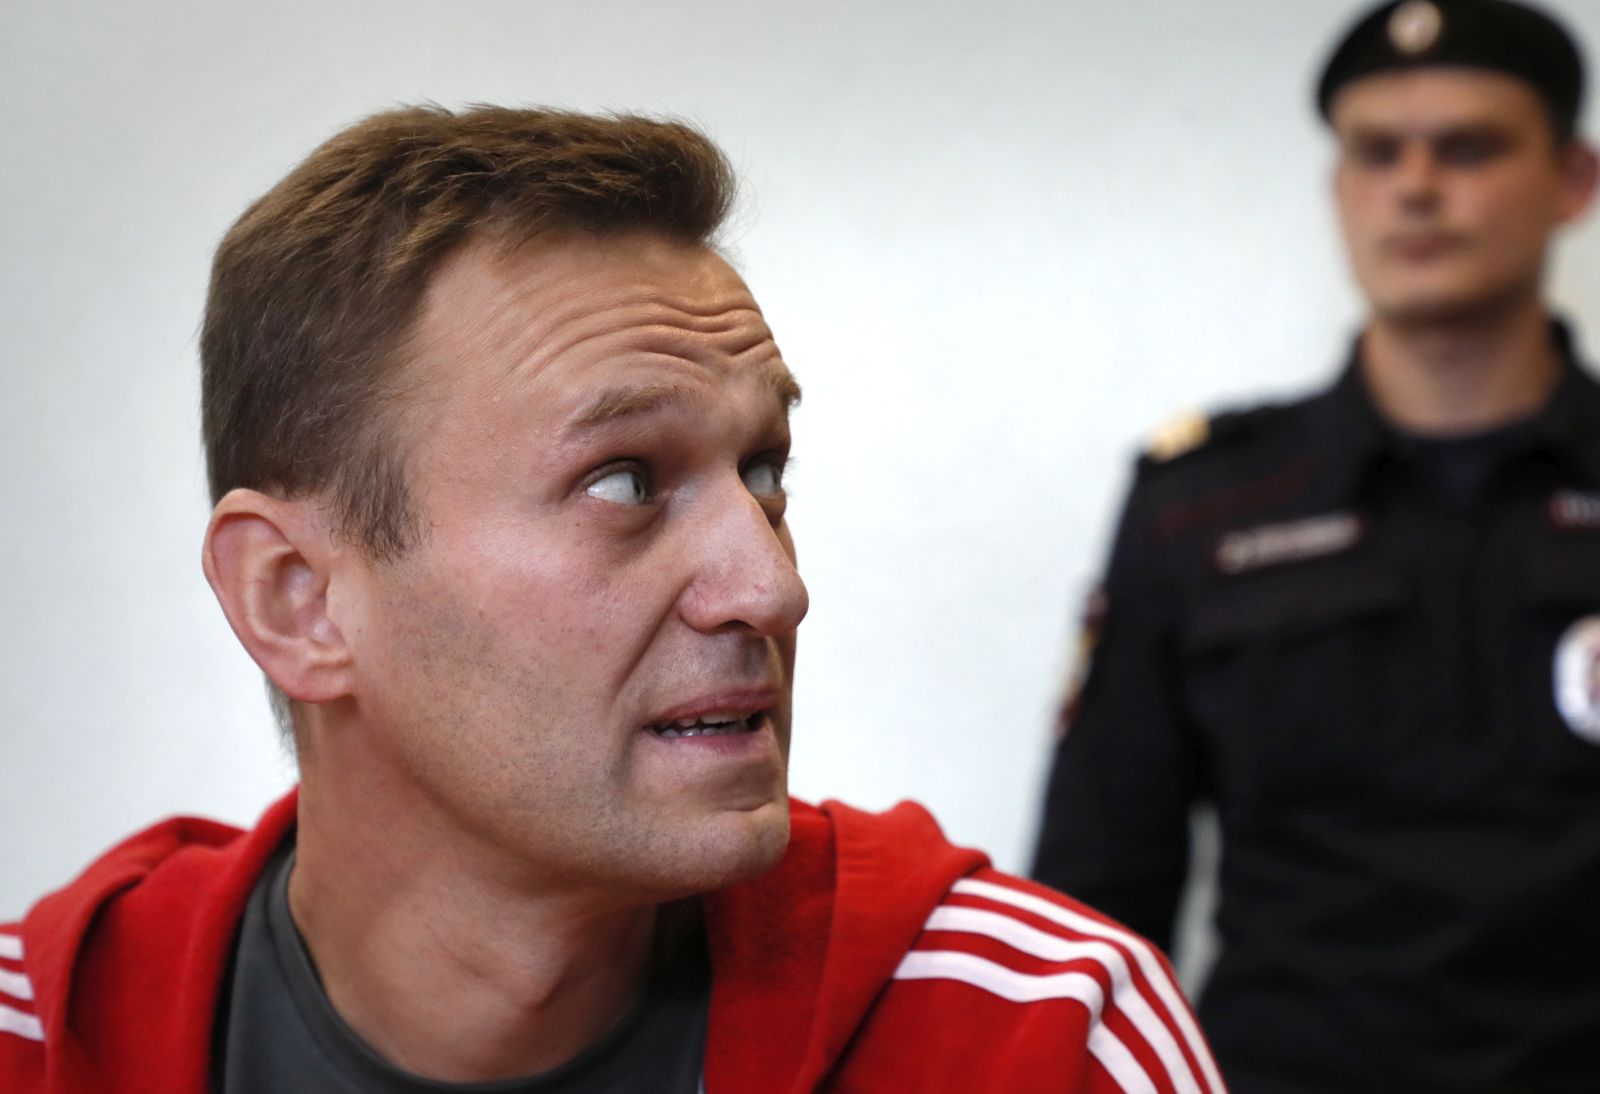 epa08934346 (FILE) - Russian opposition leader Alexei Navalny (L) attends a hearing at the Simonovsky District court in Moscow, Russia, 22 August 2019  (reissued 13 January 2021). Navalny on 13 January 2021 stated on his Twitter account that he plans to travel to Moscow on Sunday, 17 January 2021.  EPA/YURI KOCHETKOV *** Local Caption *** 55729299